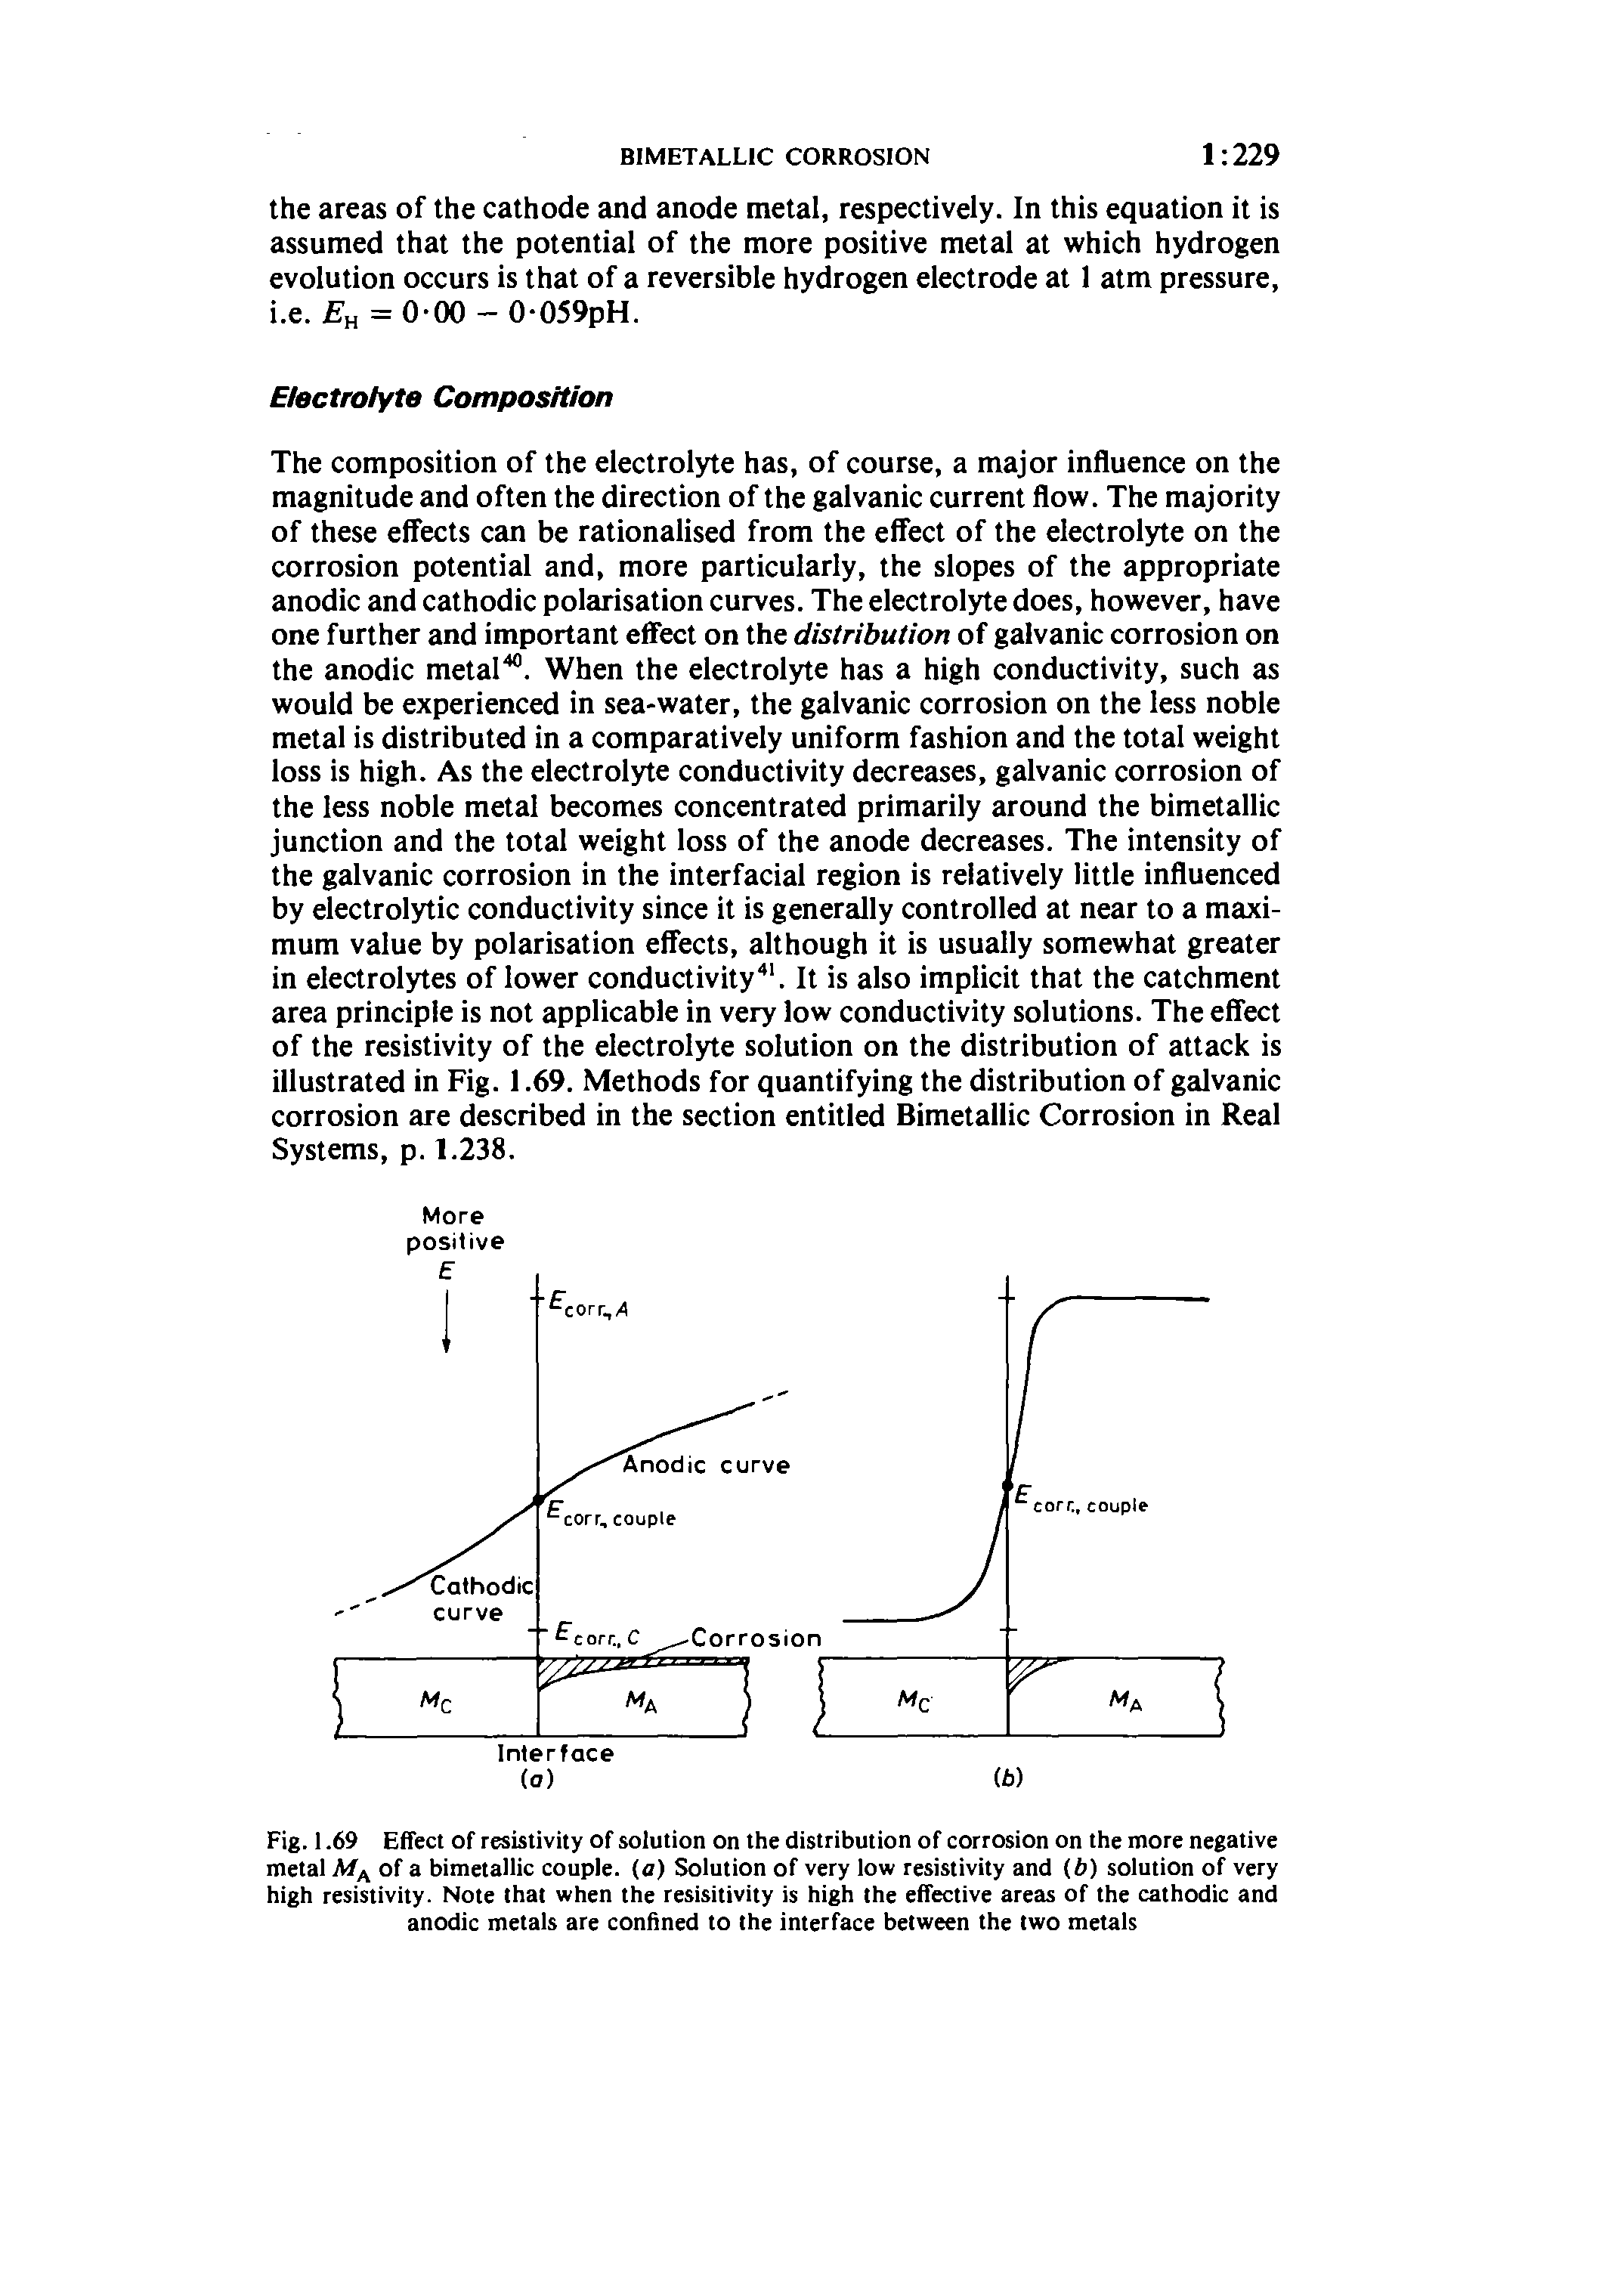 Fig. 1.69 Effect of resistivity of solution on the distribution of corrosion on the more negative metal of a bimetallic couple, (a) Solution of very low resistivity and (b) solution of very high resistivity. Note that when the resisitivity is high the effective areas of the cathodic and anodic metals are confined to the interface between the two metals...